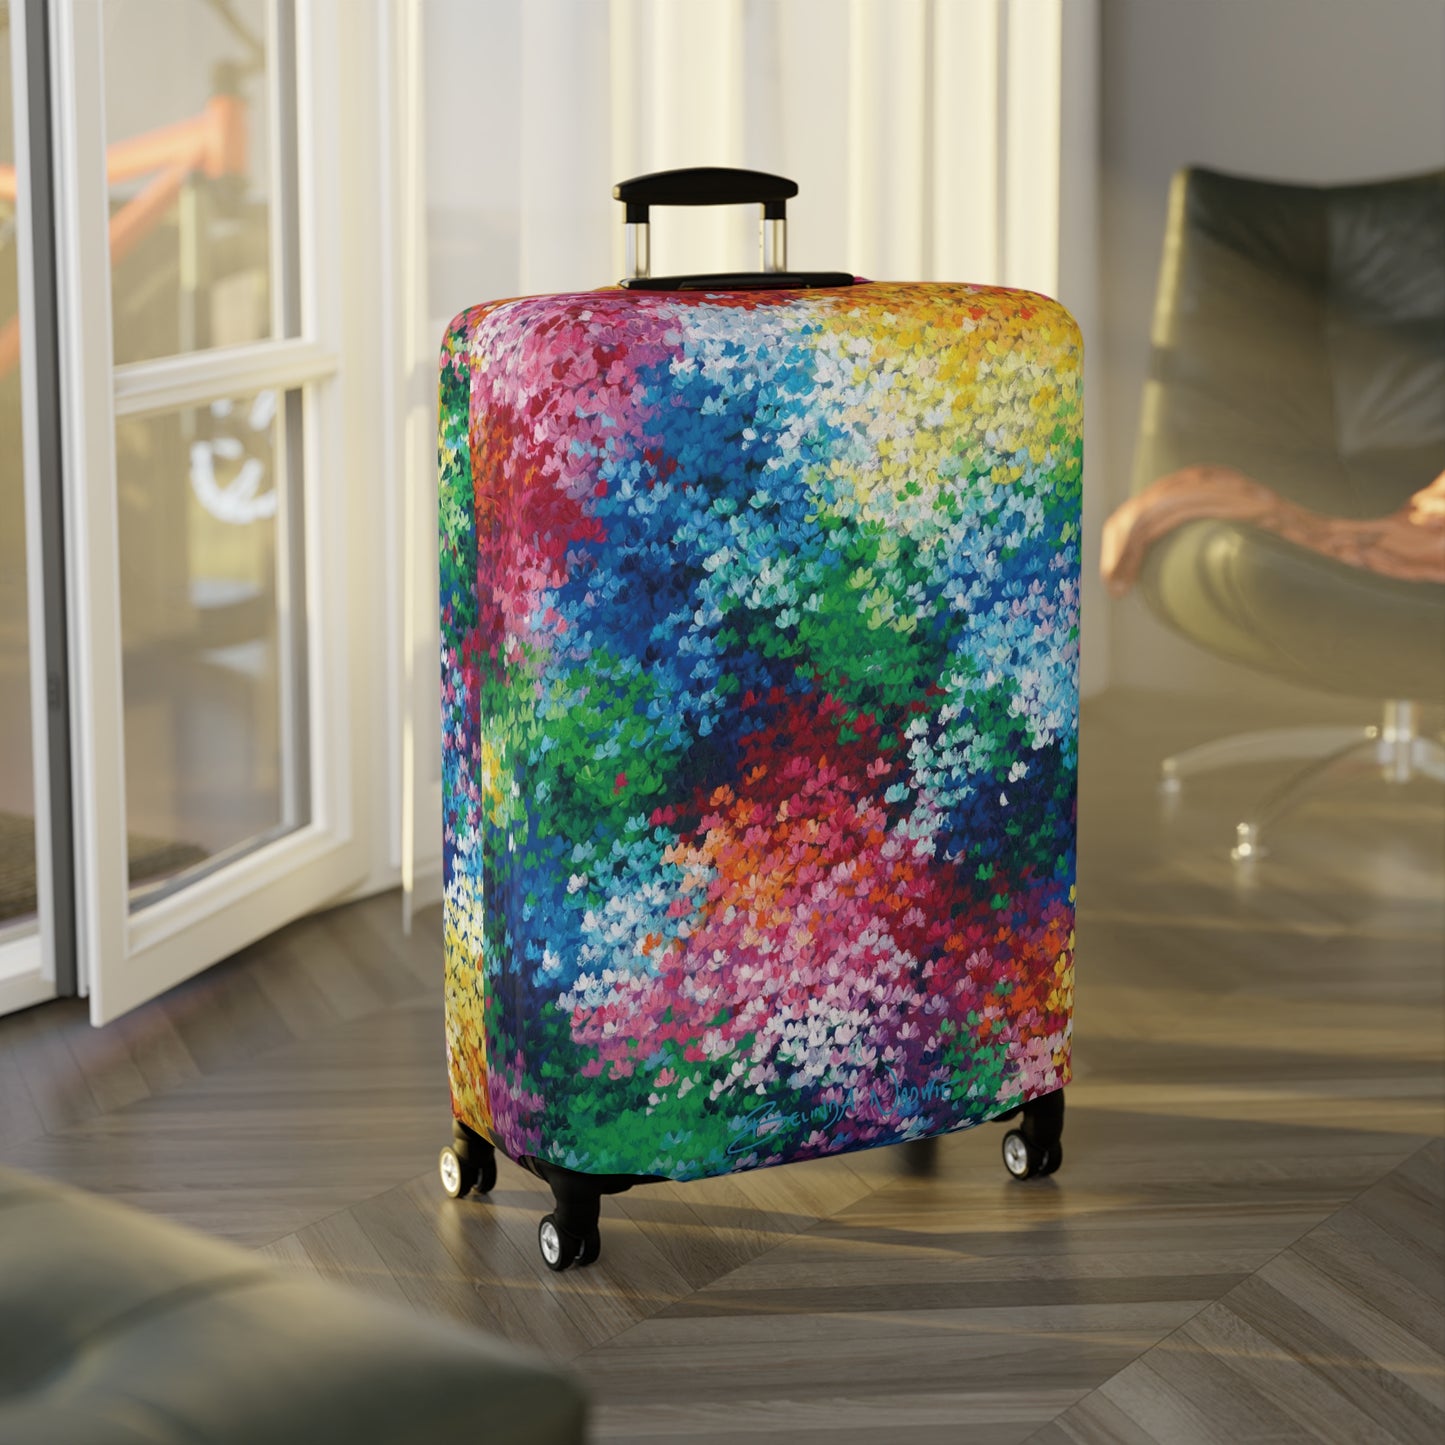 All About Us Luggage Cover